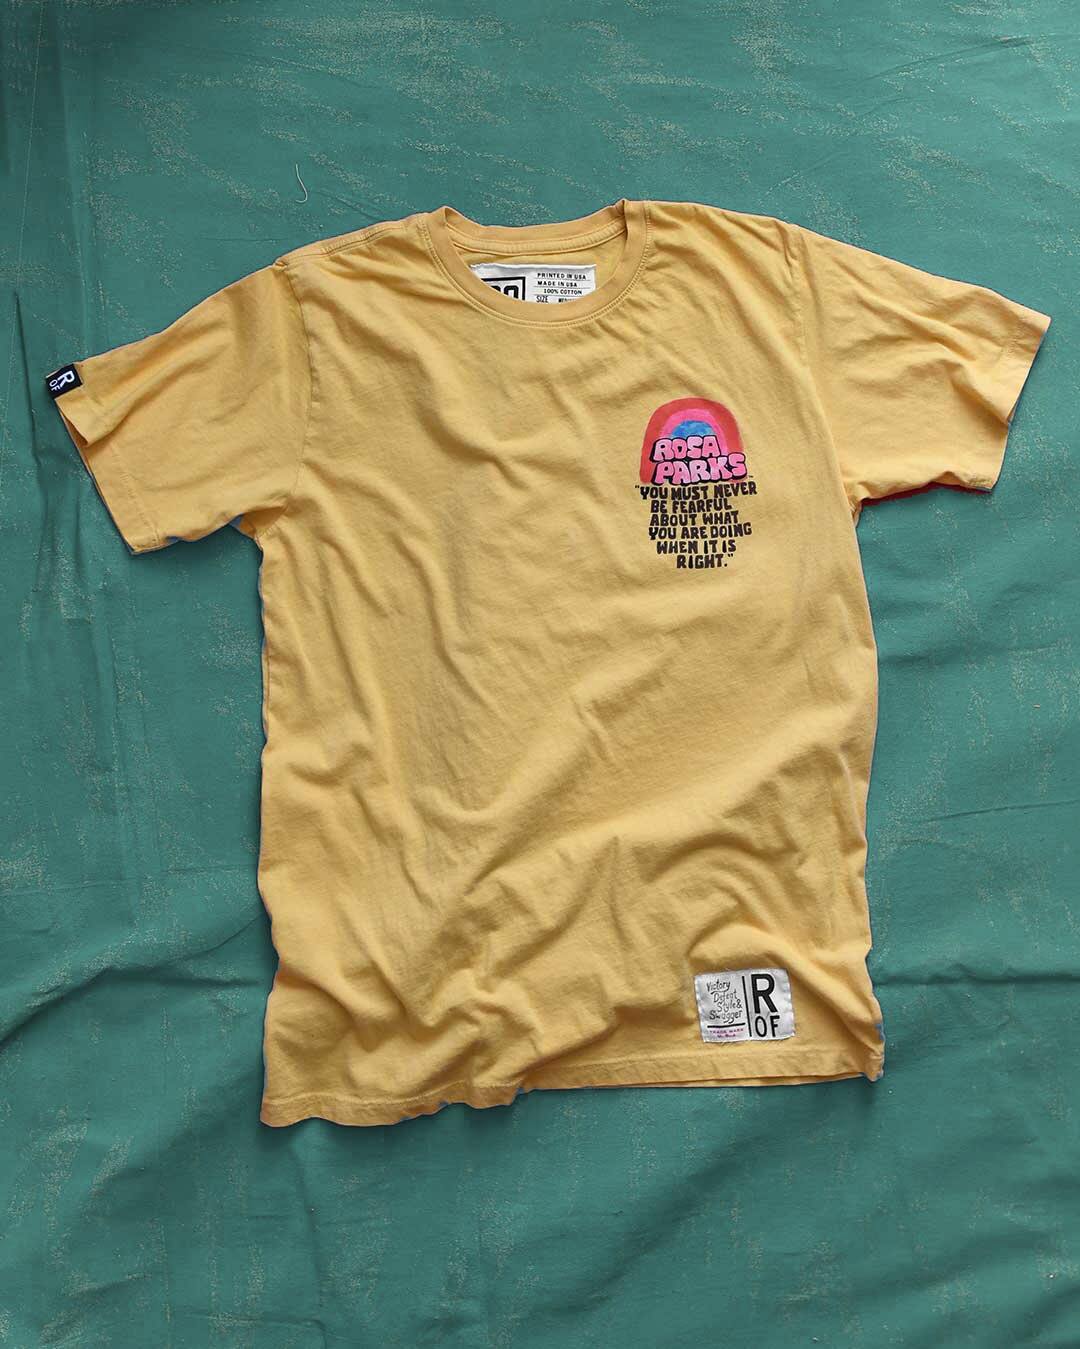 Rosa Parks 'Never Be Fearful' Yellow Tee - Roots of Fight